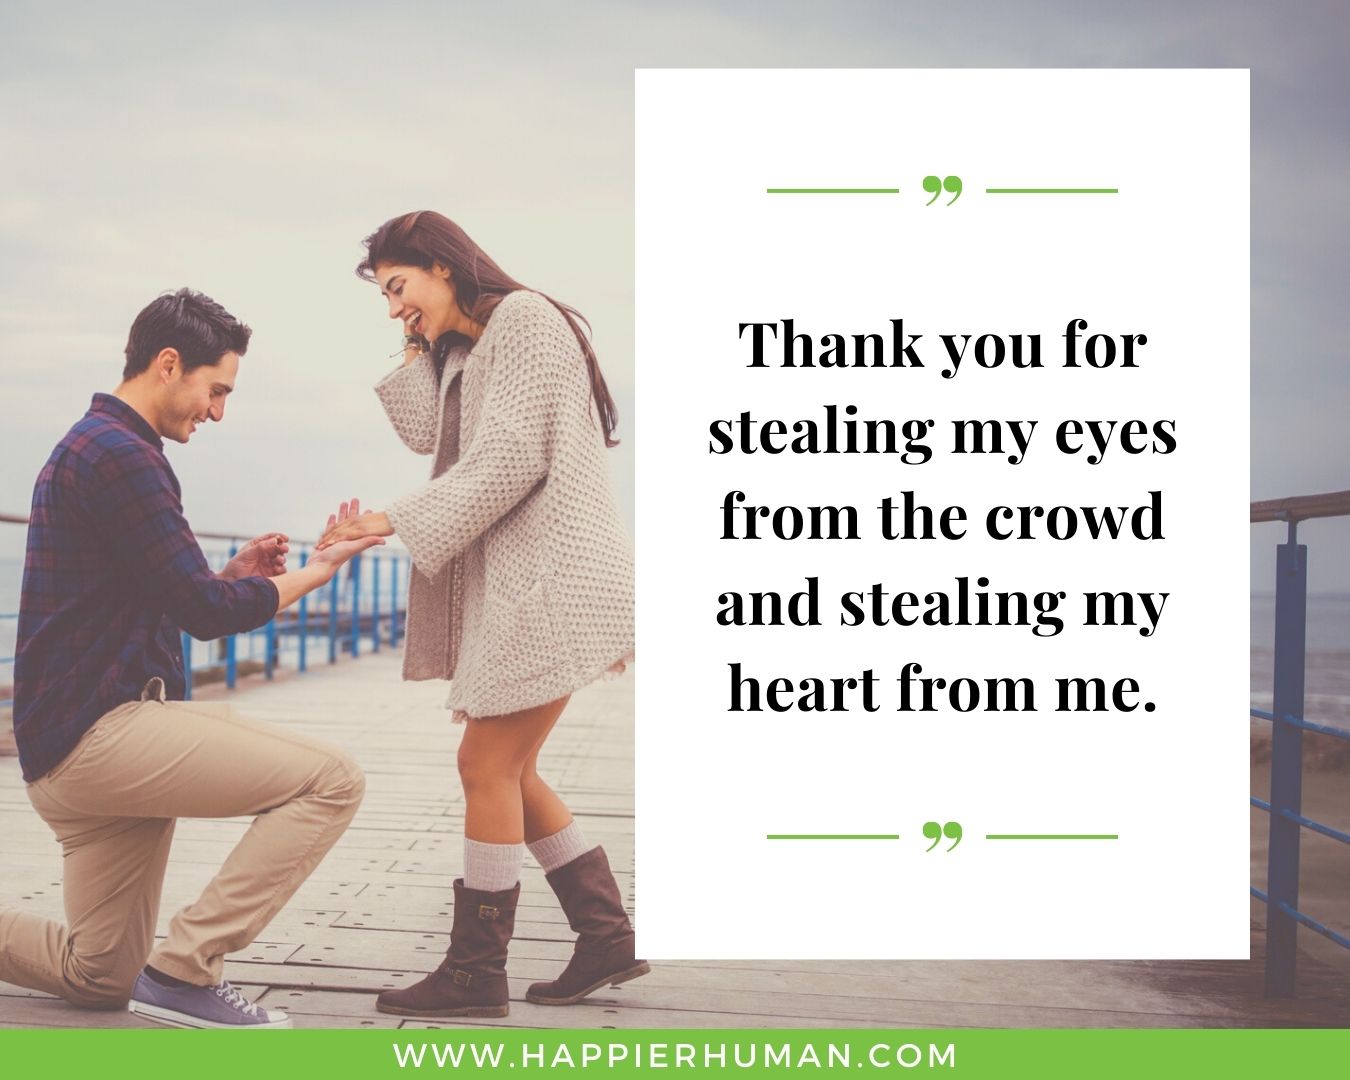 Sweet and Romantic Love Quotes for Her - “Thank you for stealing my eyes from the crowd and stealing my heart from me.”